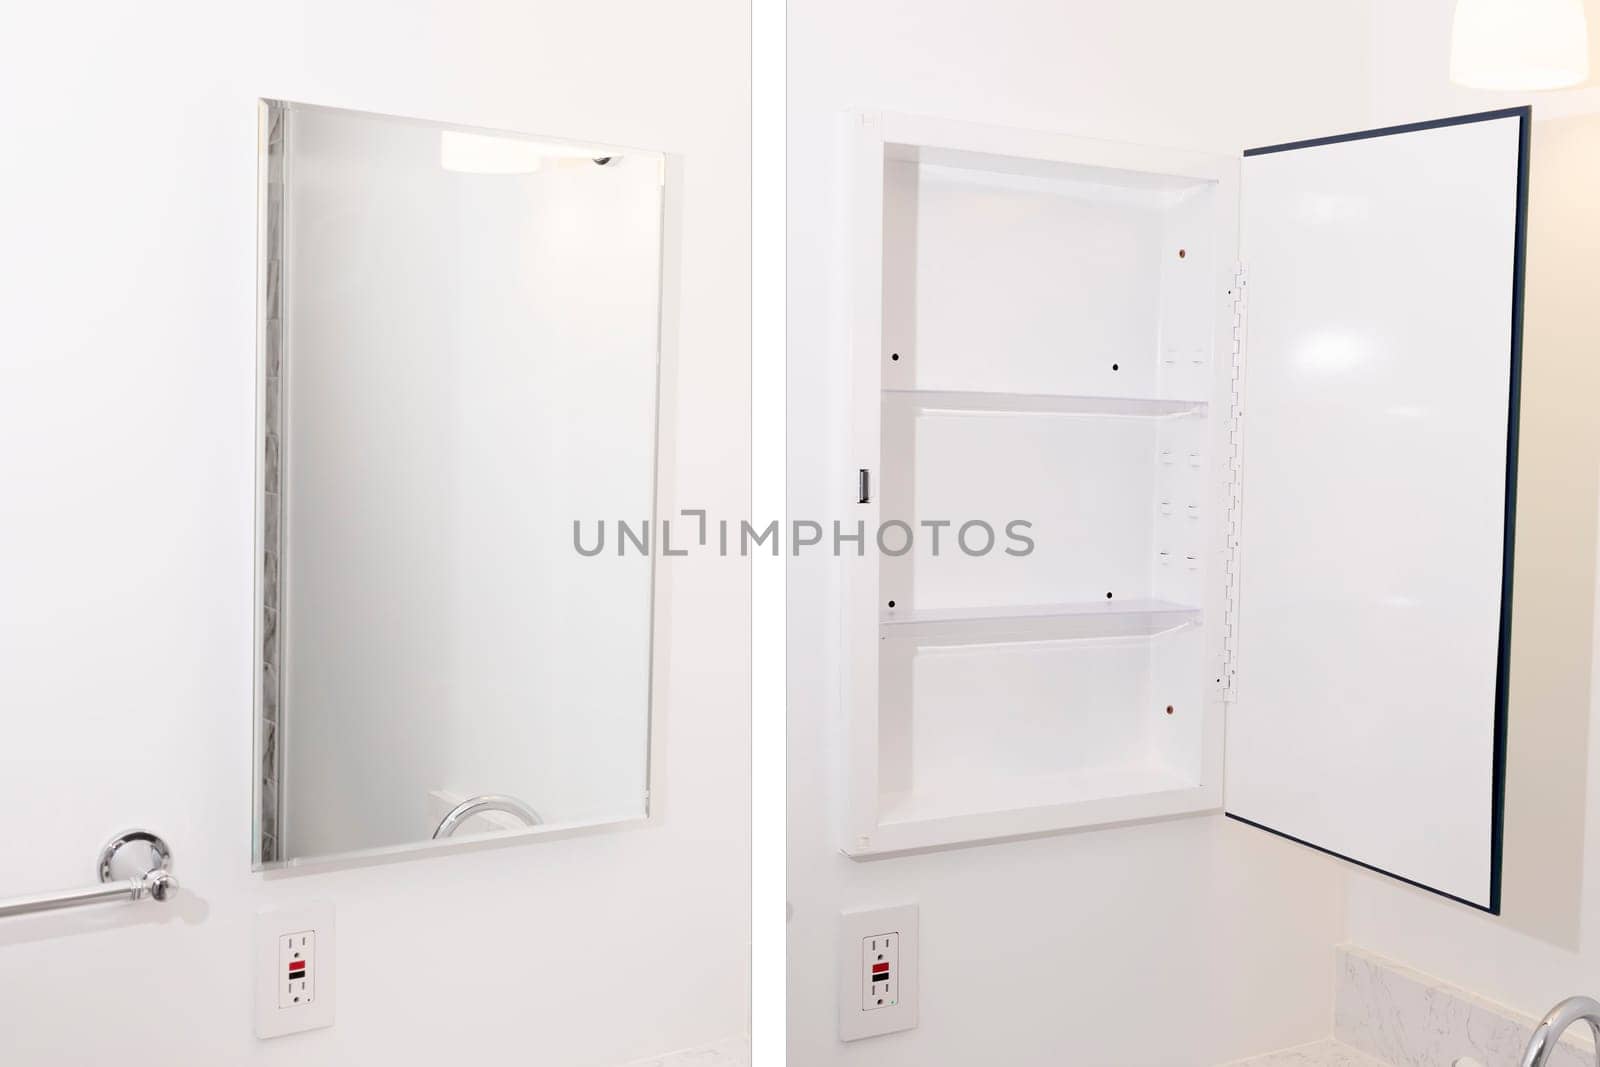 Empty Bathroom Medicine Cabinet With Mirror Open And Closed, White Walls. Pills And Drug Medicament Container Mockup. Open Mirror Door Stand. Horizontal Plane, Template. by netatsi